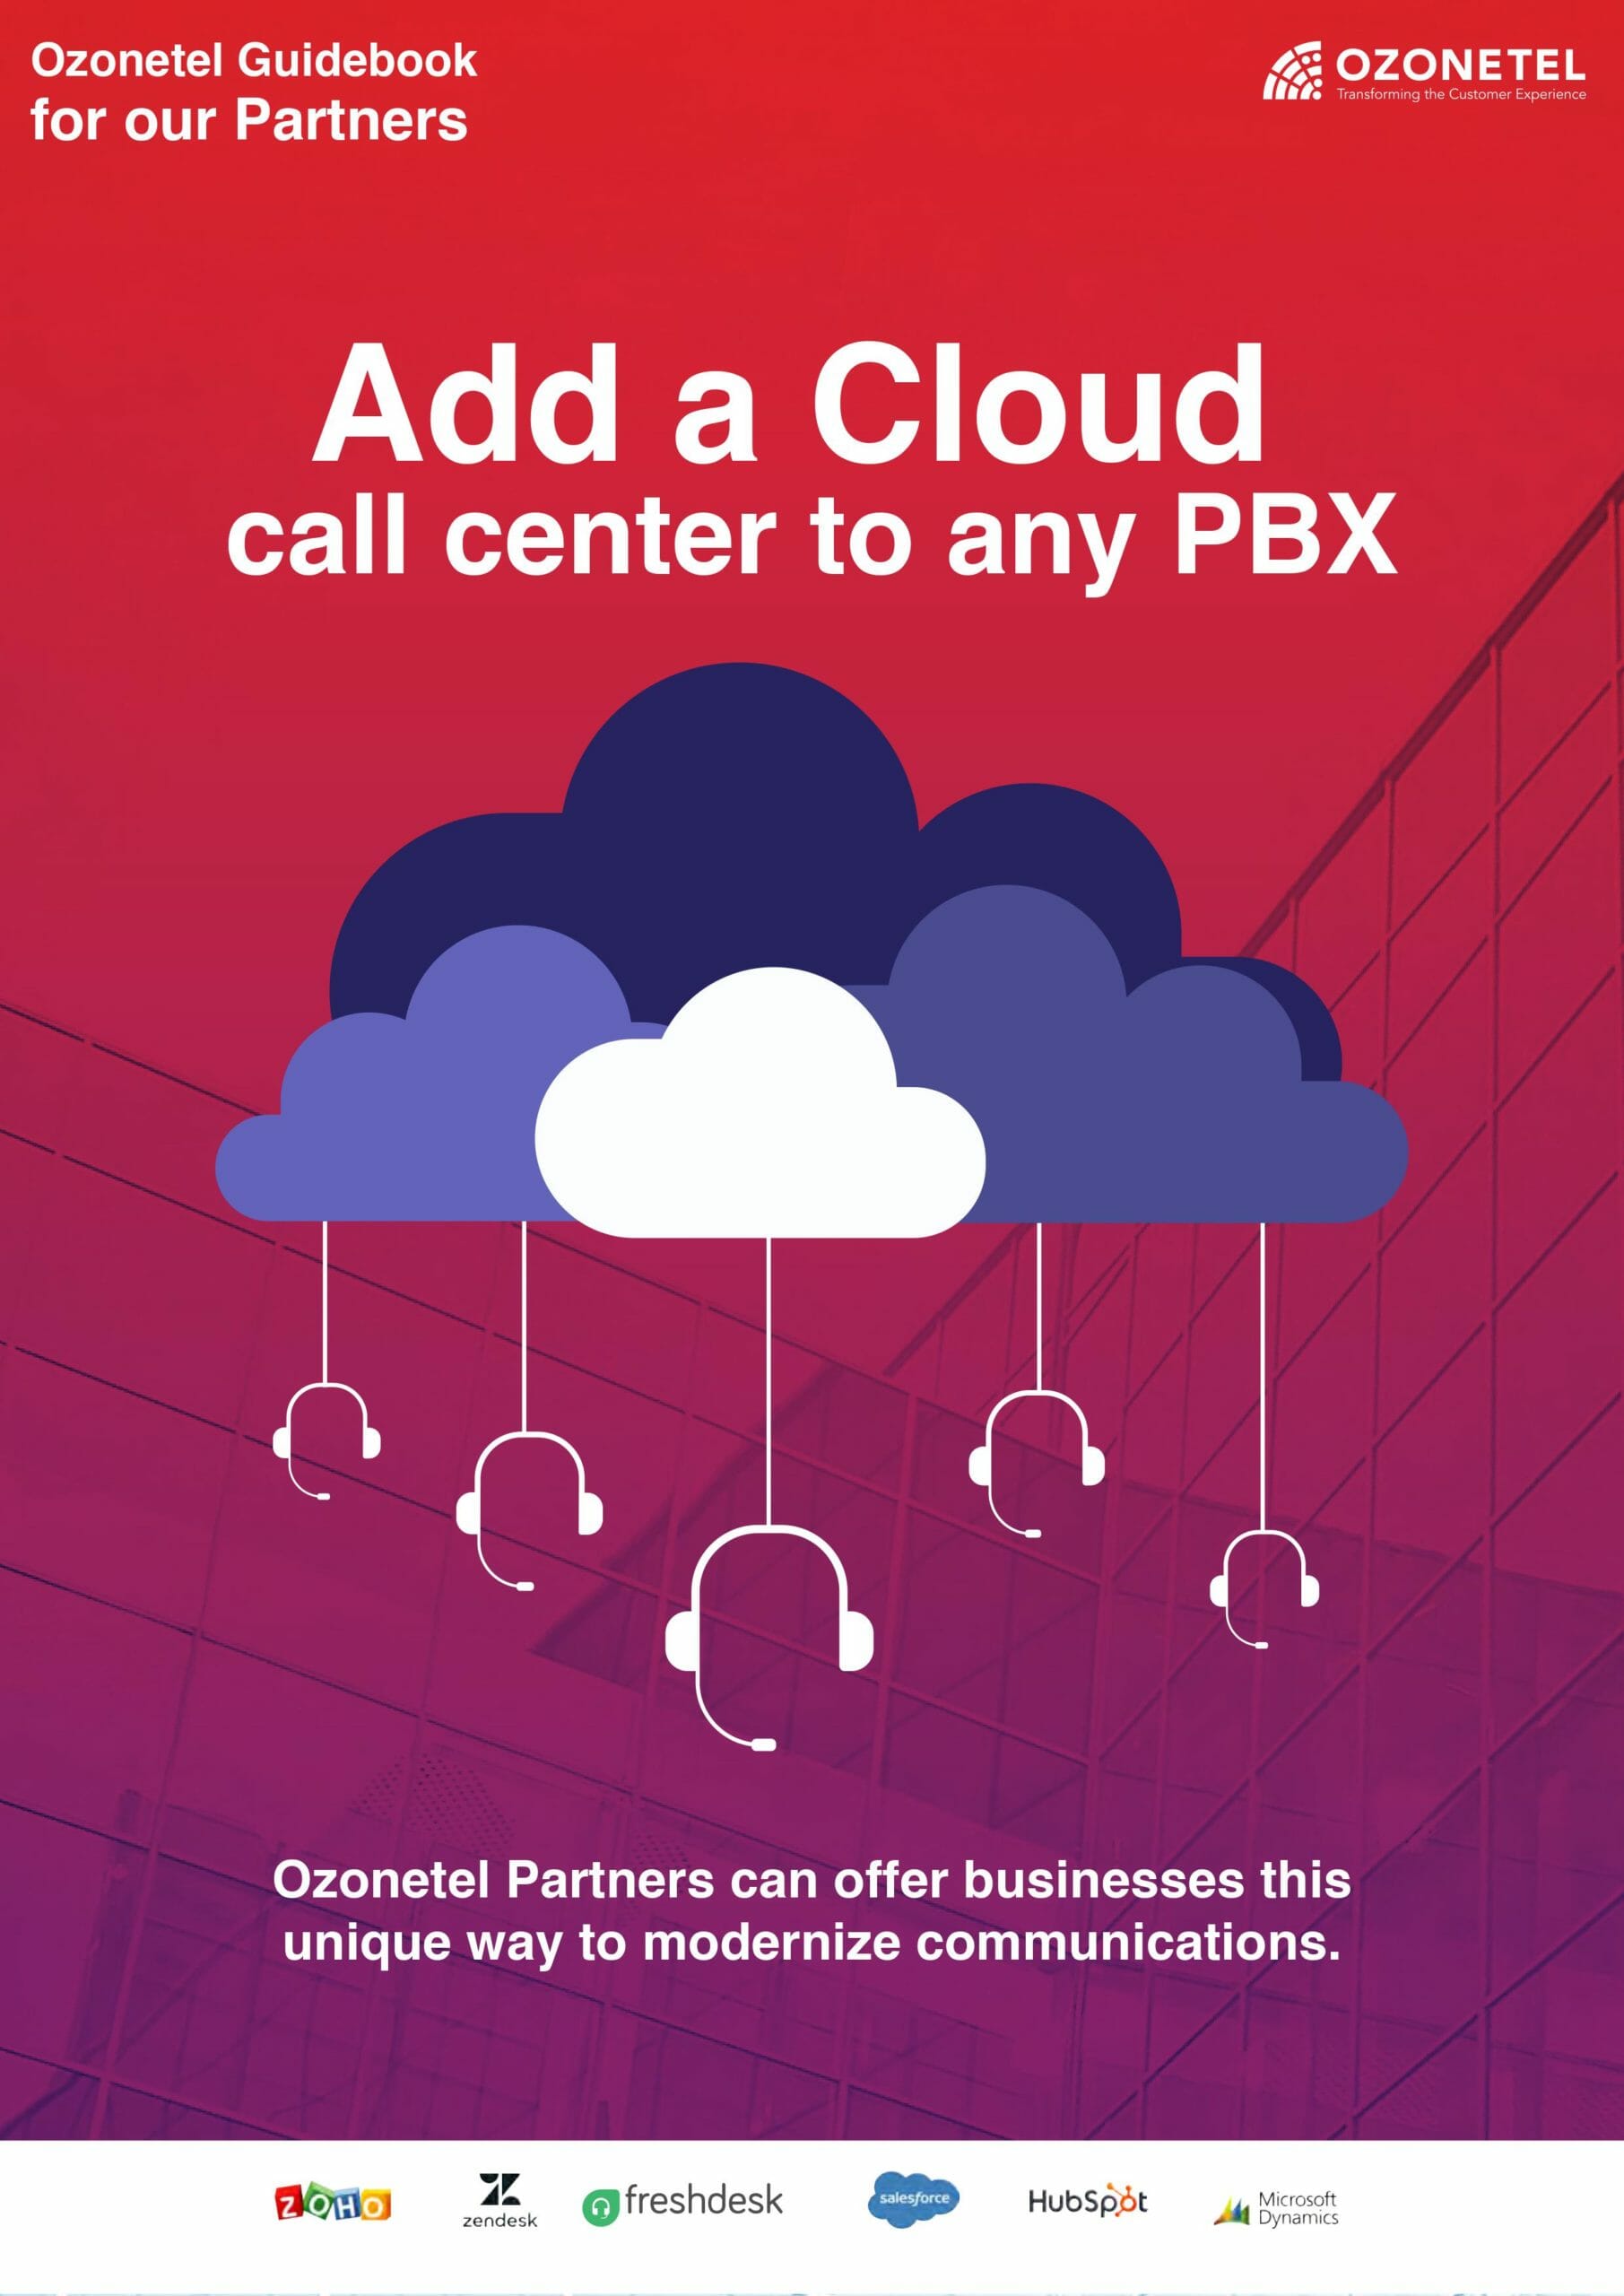 <a href="#" class="elementor-button-link elementor-button elementor-size-md ebook-download" data-name="Add cloud to any PBX" data-pdf="https://ozonetel.com/wp-content/uploads/2021/08/AddCloud_OzonetelPartners.pdf" data-img="https://ozonetel.com/wp-content/uploads/2021/08/add_pbx-scaled.jpg">Download Ebook</a>